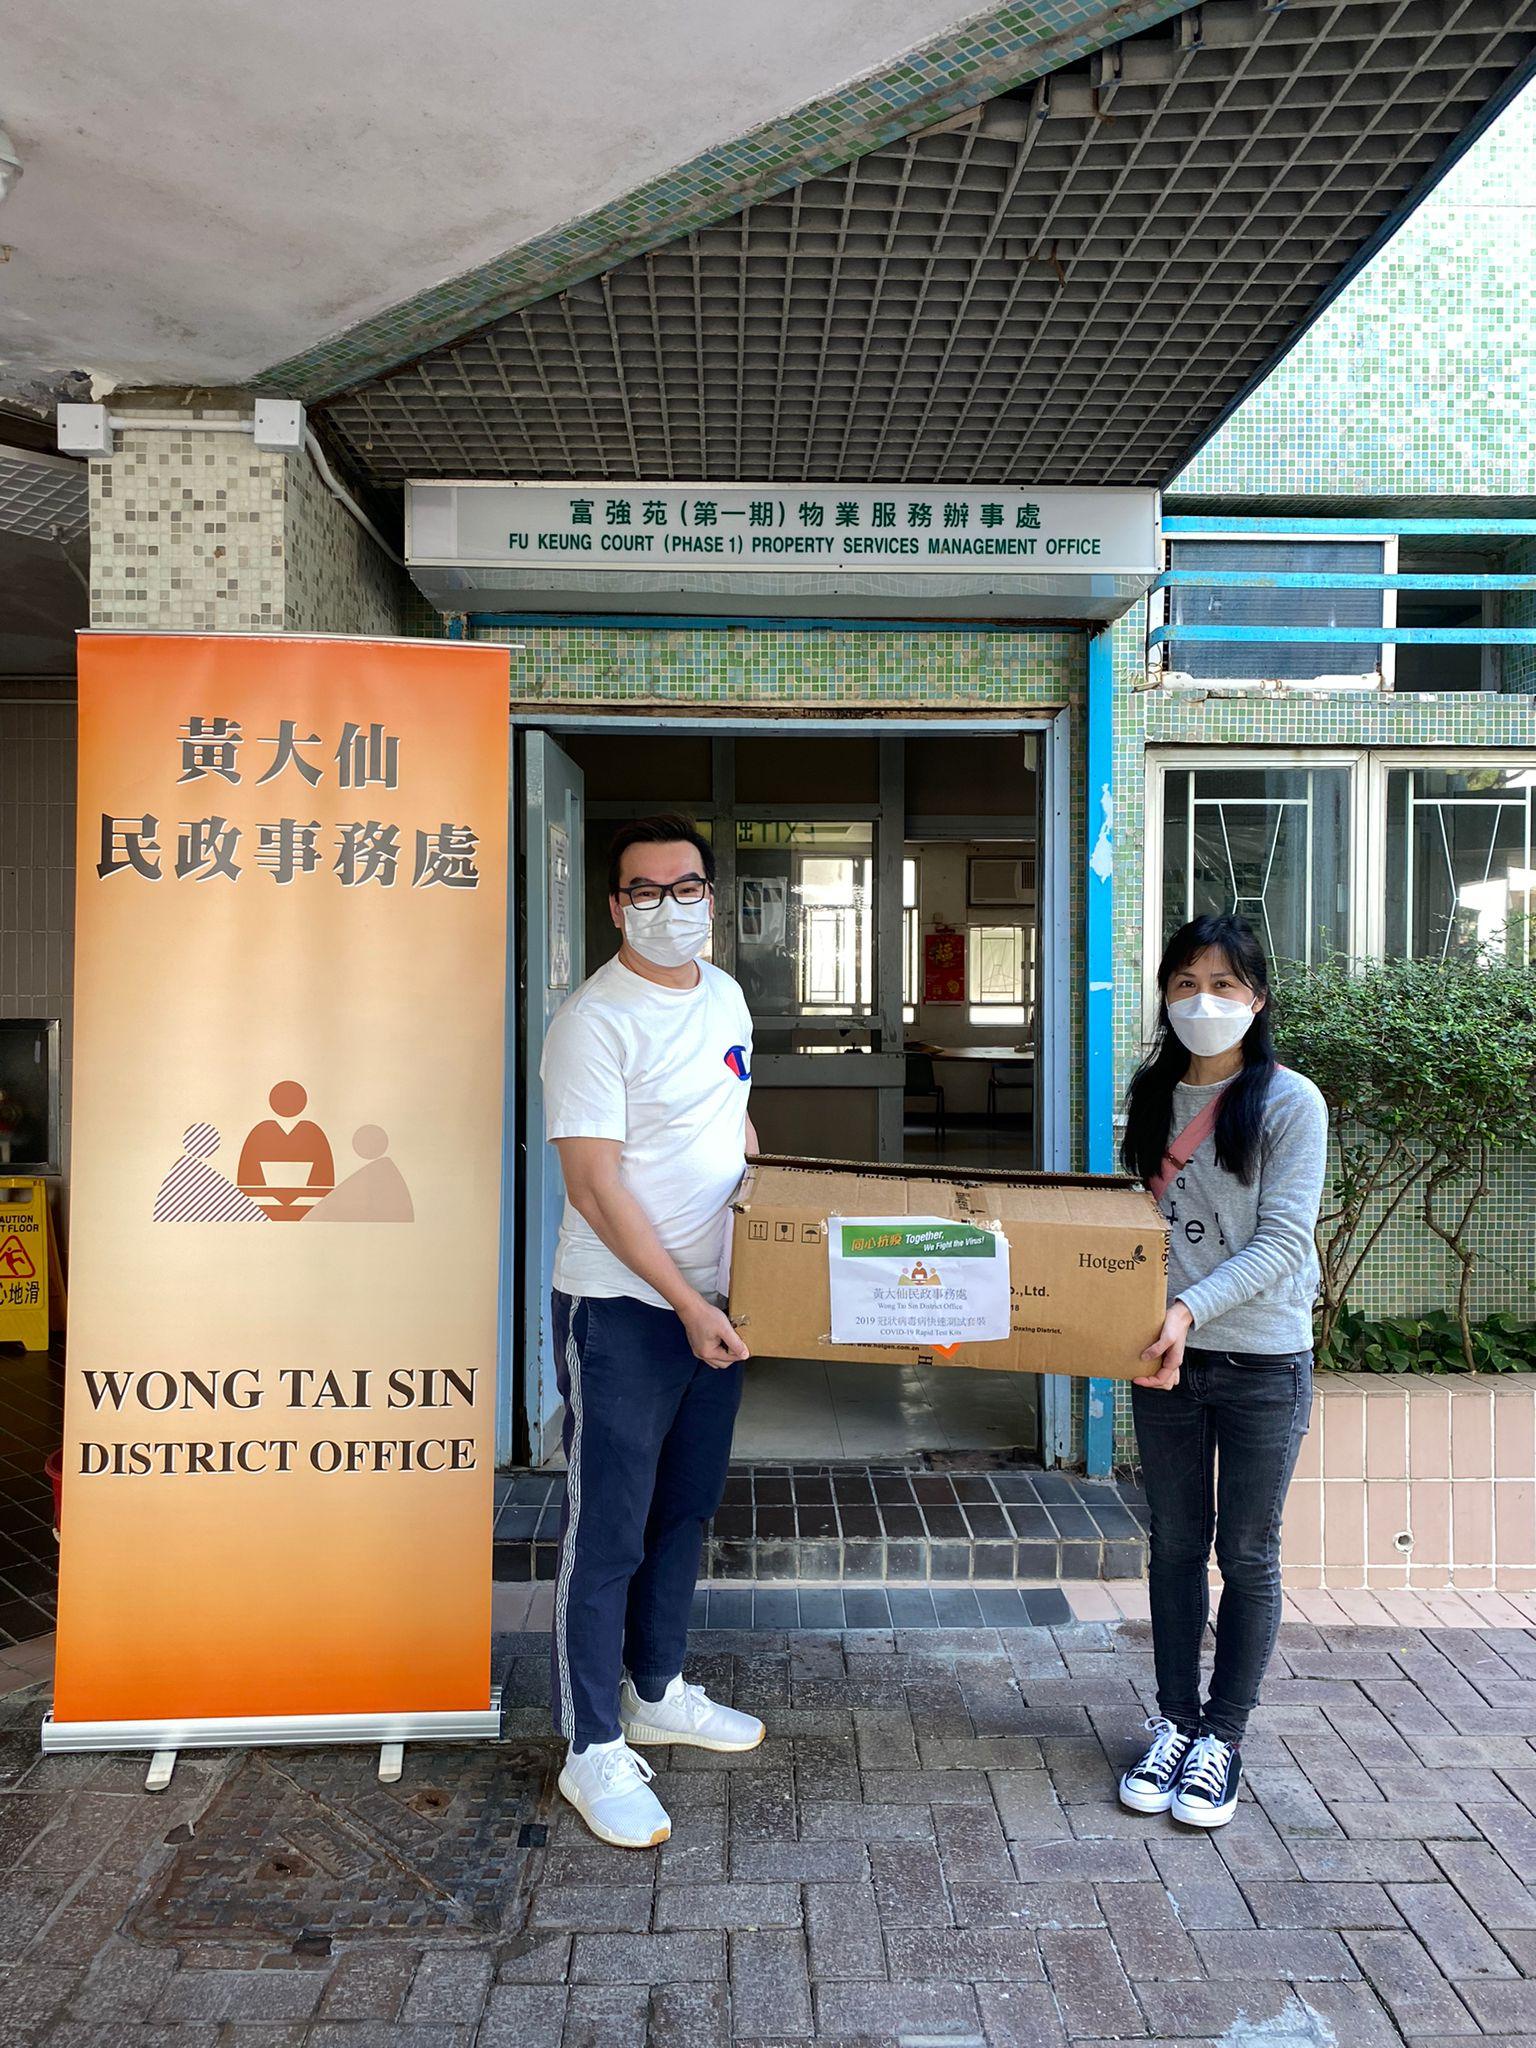 The Wong Tai Sin District Office today (March 10) distributed COVID-19 rapid test kits to households, cleansing workers and property management staff living and working in Fu Keung Court for voluntary testing through the property management company.